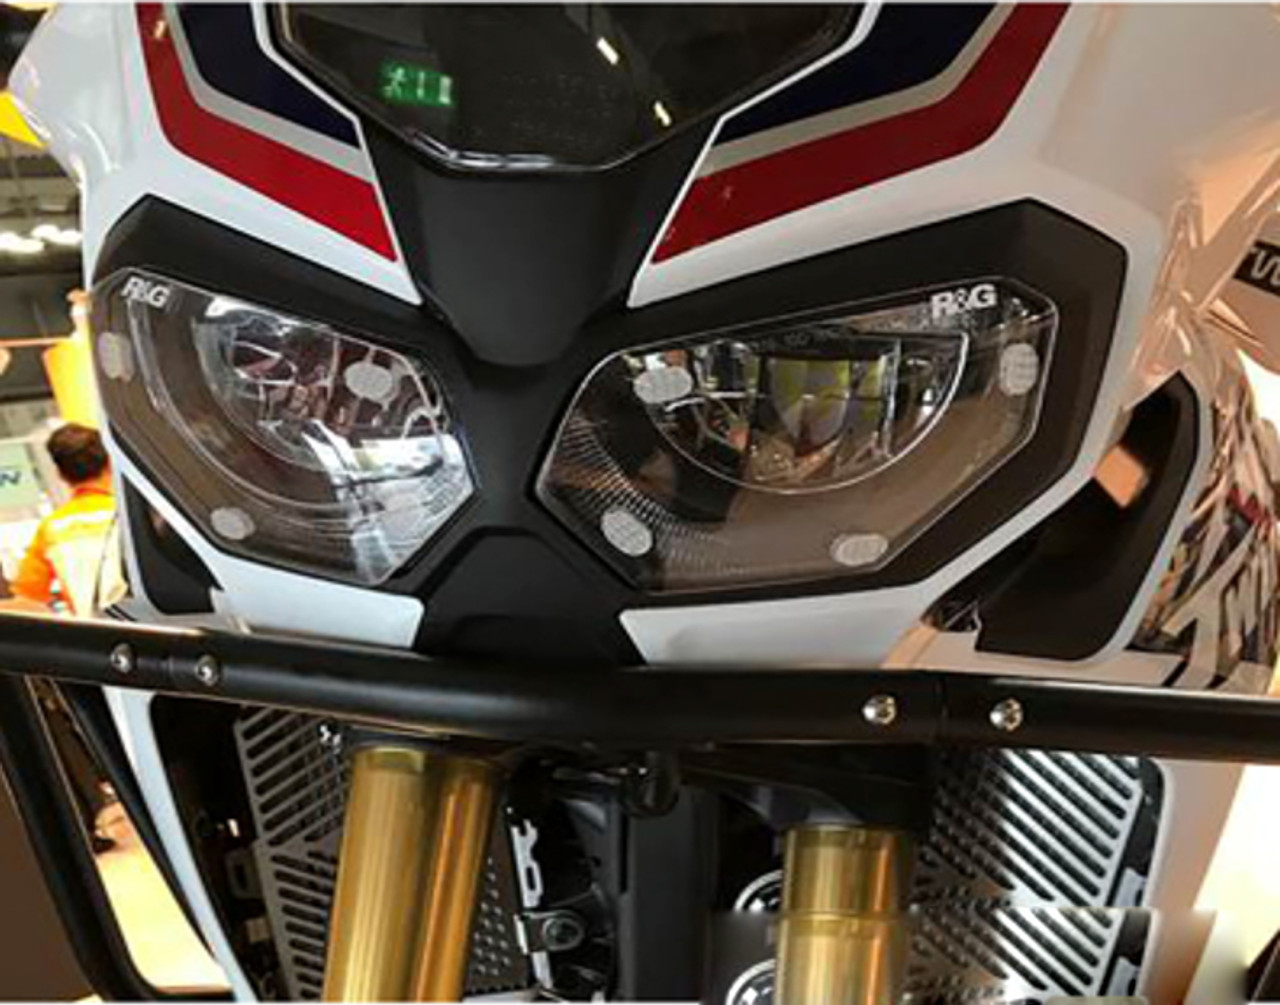 Front Headlight Lens Covers Guard For Honda CRF1000L Africa Twin 2016-2017 Clear